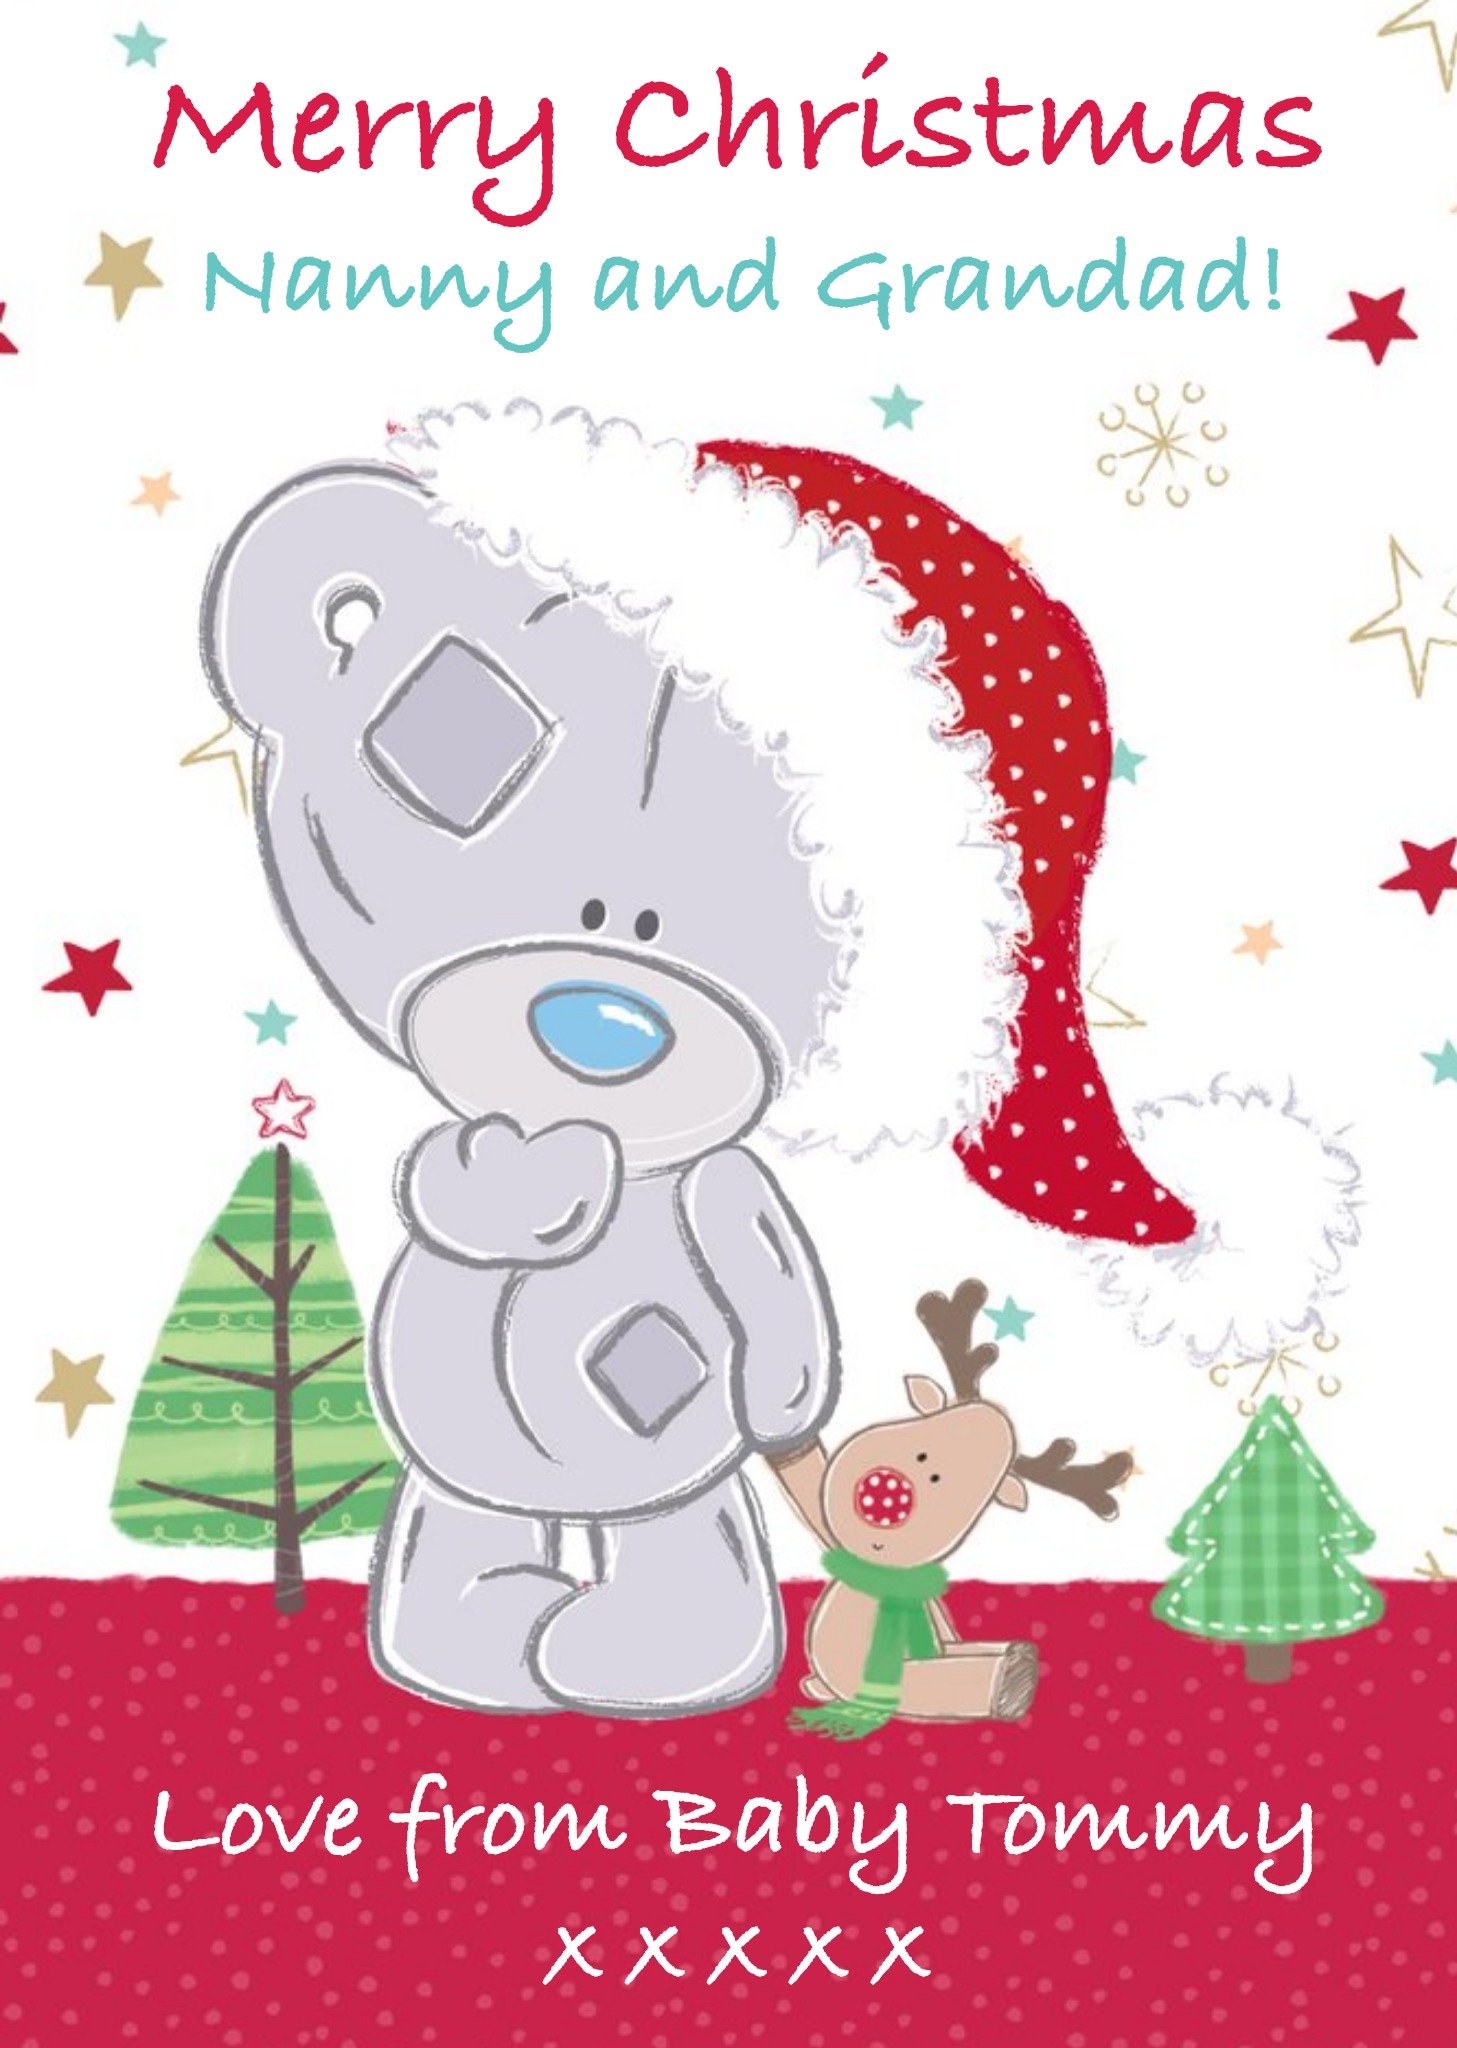 Tiny Tatty Teddy Tatty Teddy With Little Reindeer Personalised Christmas Card For Grandparents Ecard